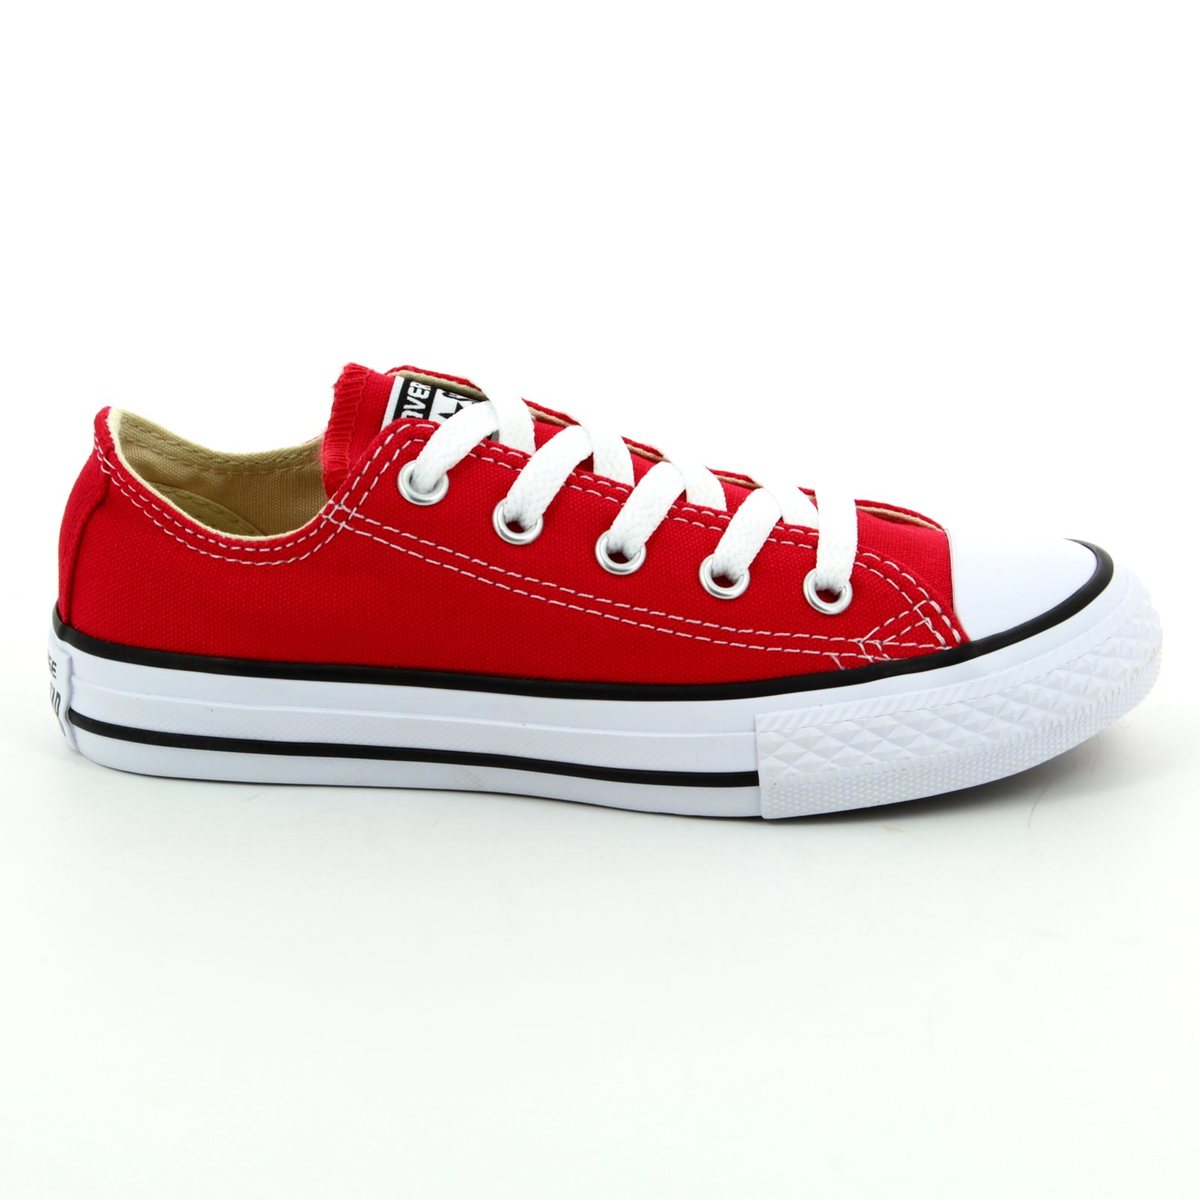 red youth converse